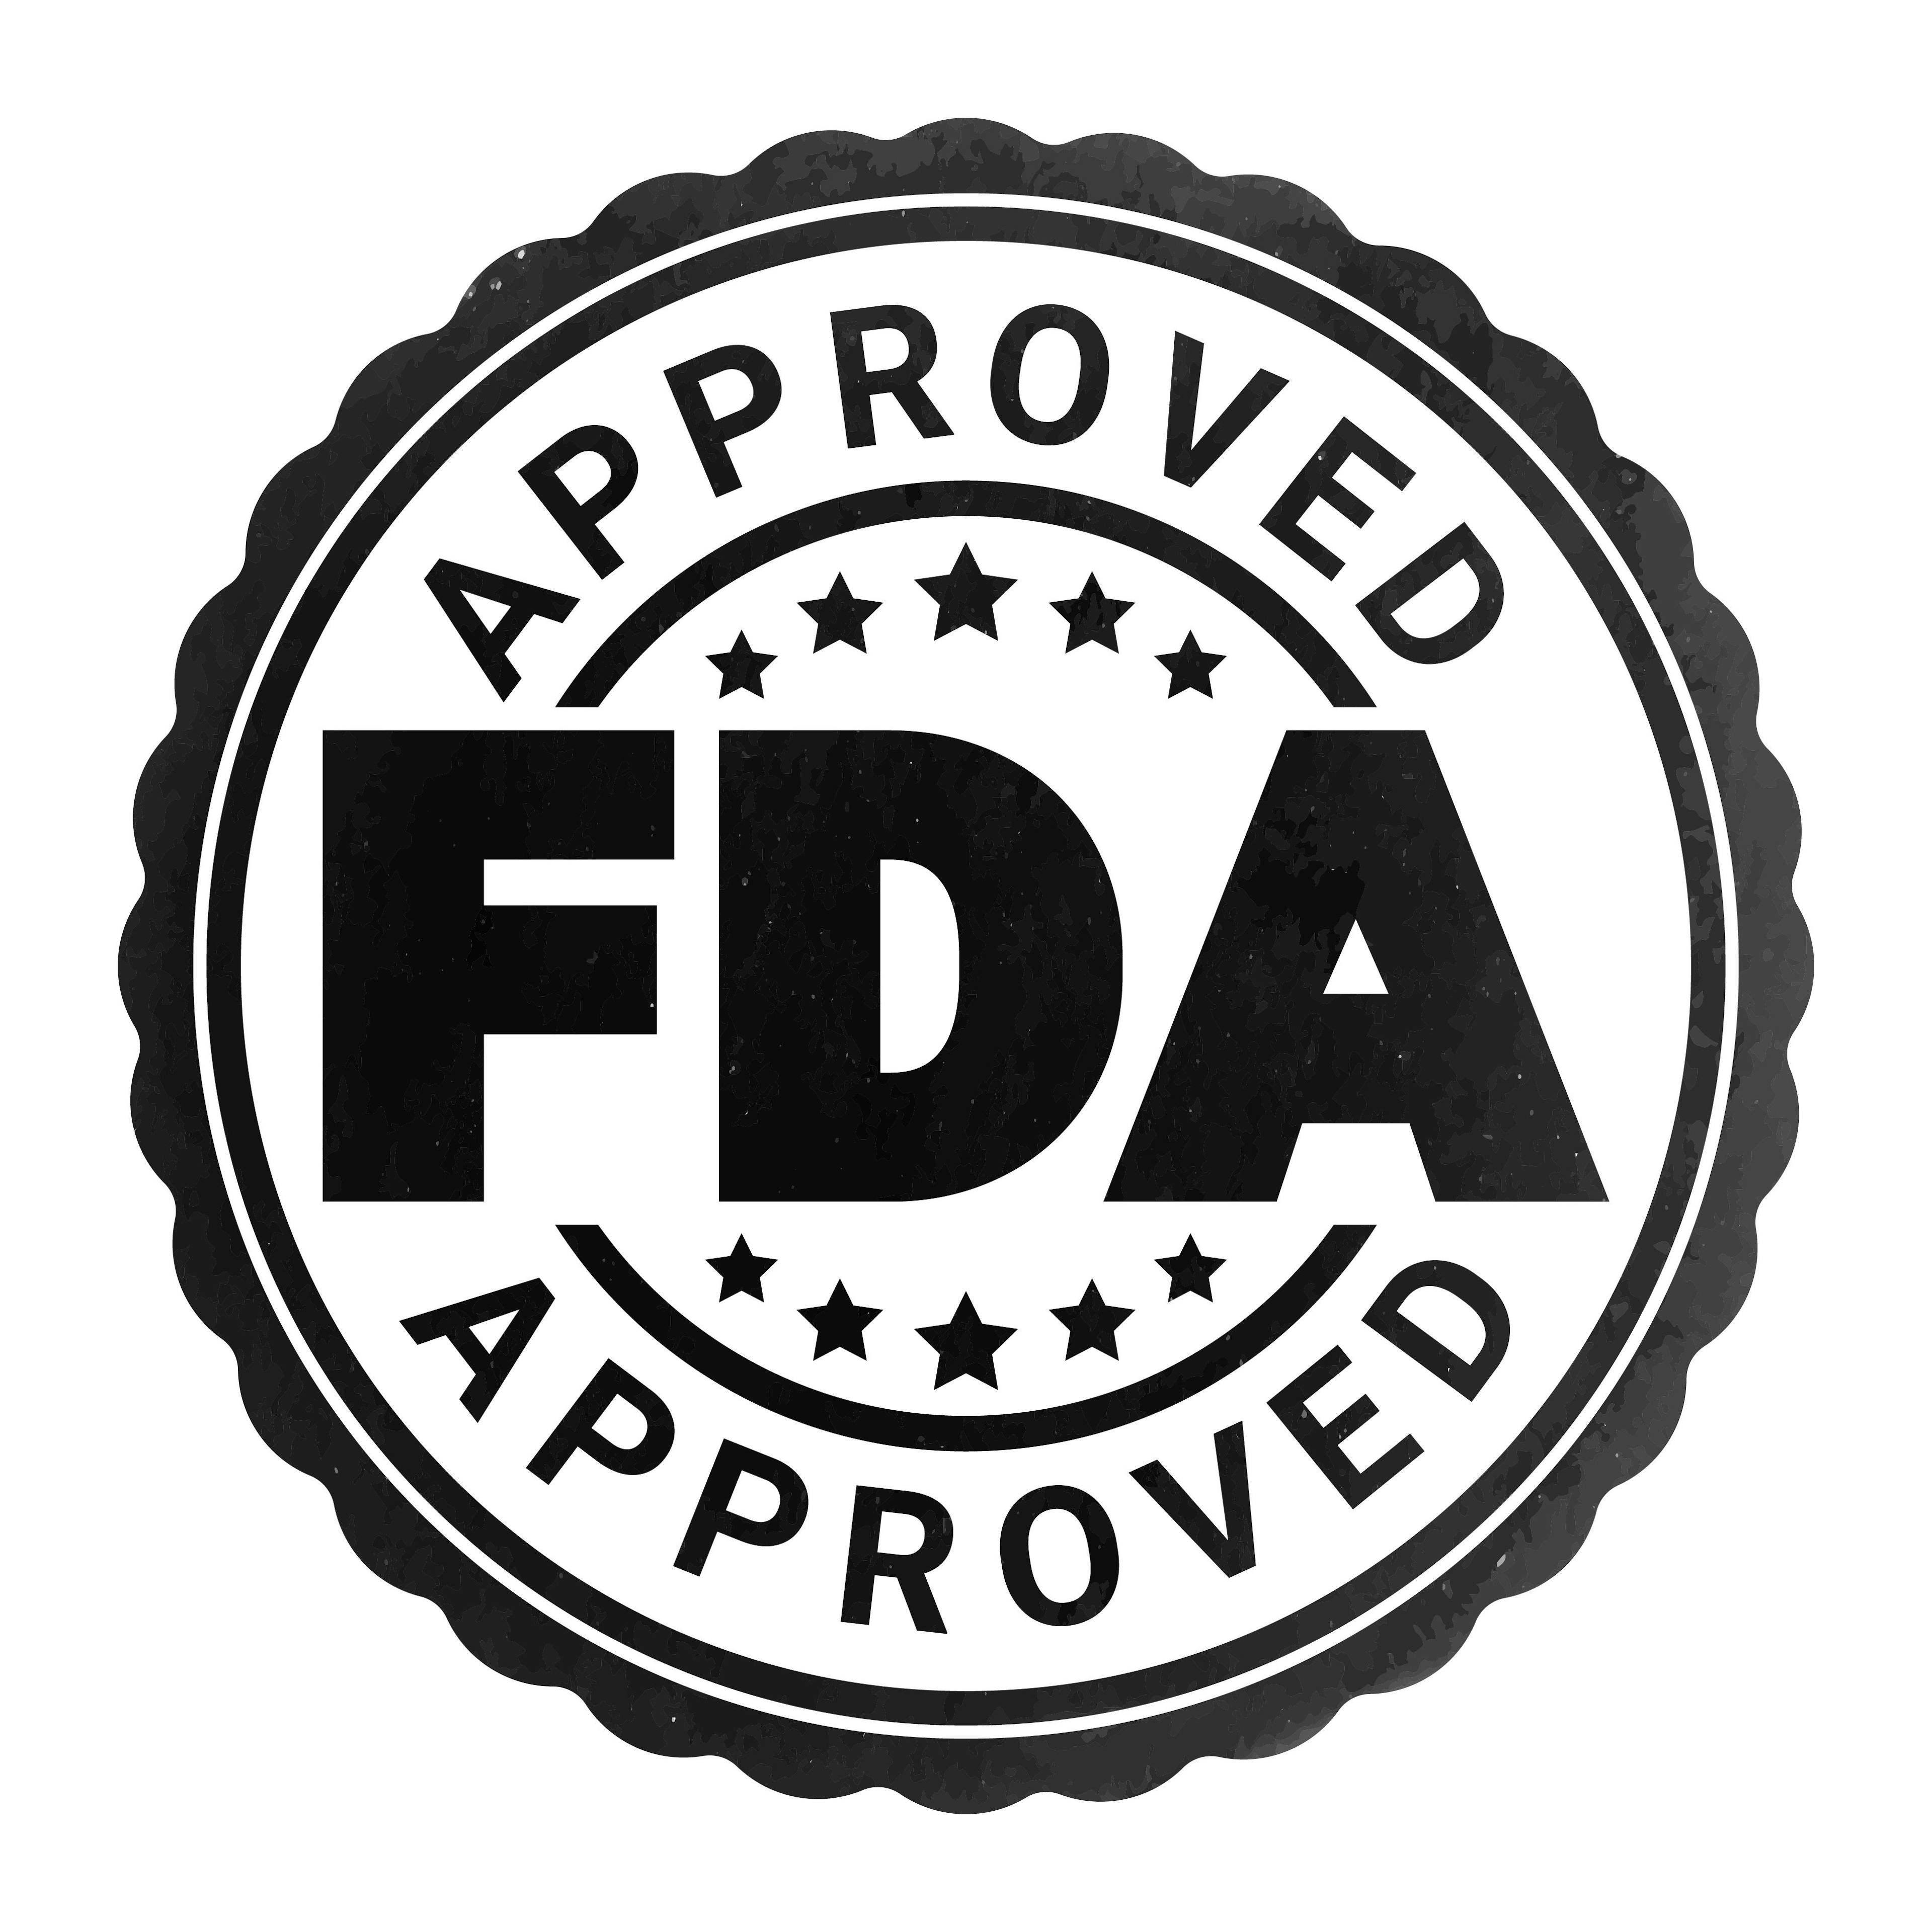 IDP-126 Approved by FDA for Treatment of Acne